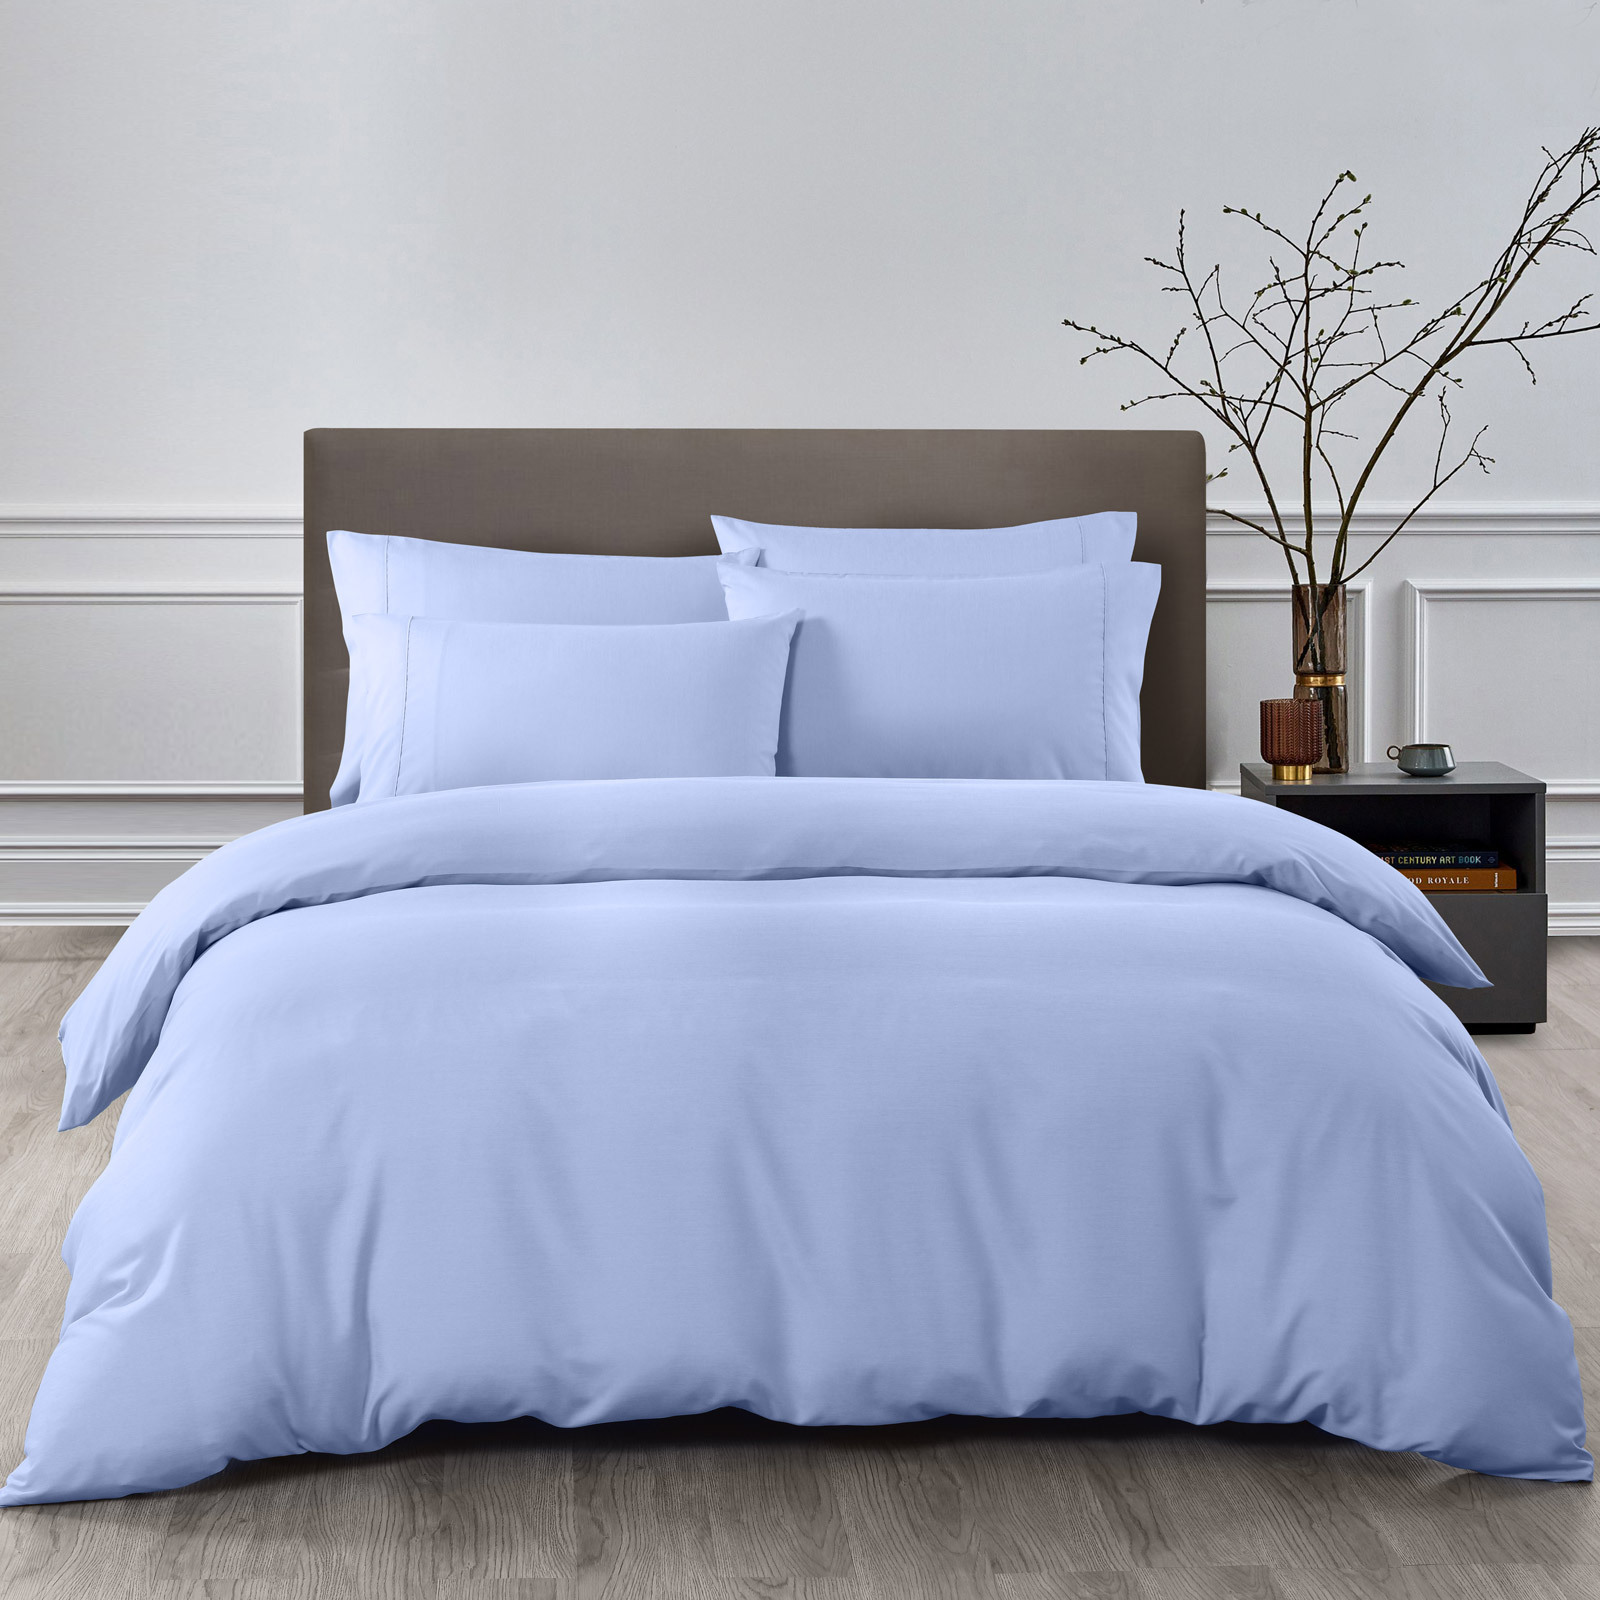 Blue Bamboo Microfibre Quilt Cover, Light Blue Queen Bedspreads